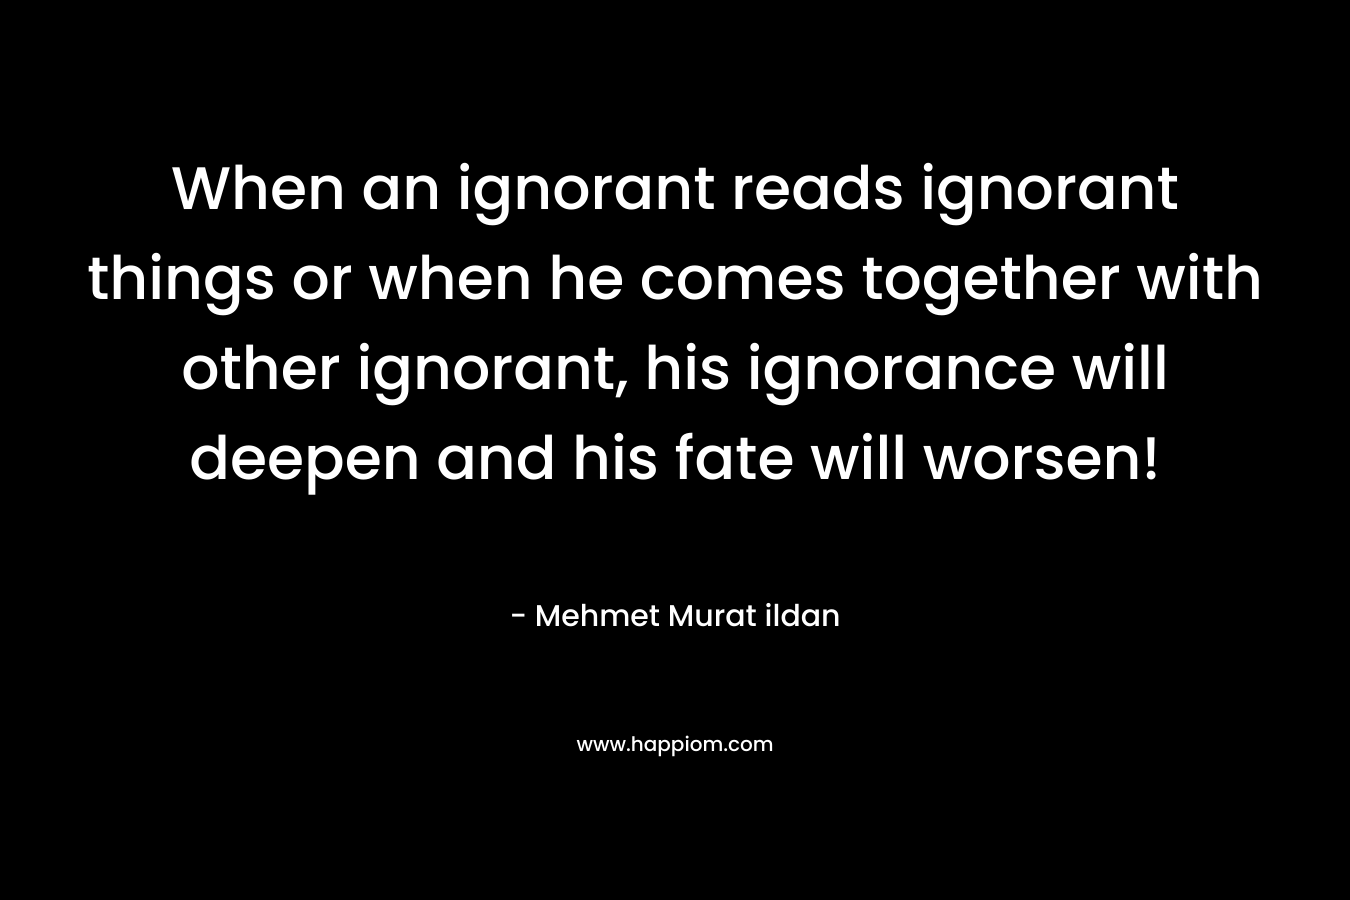 When an ignorant reads ignorant things or when he comes together with other ignorant, his ignorance will deepen and his fate will worsen!